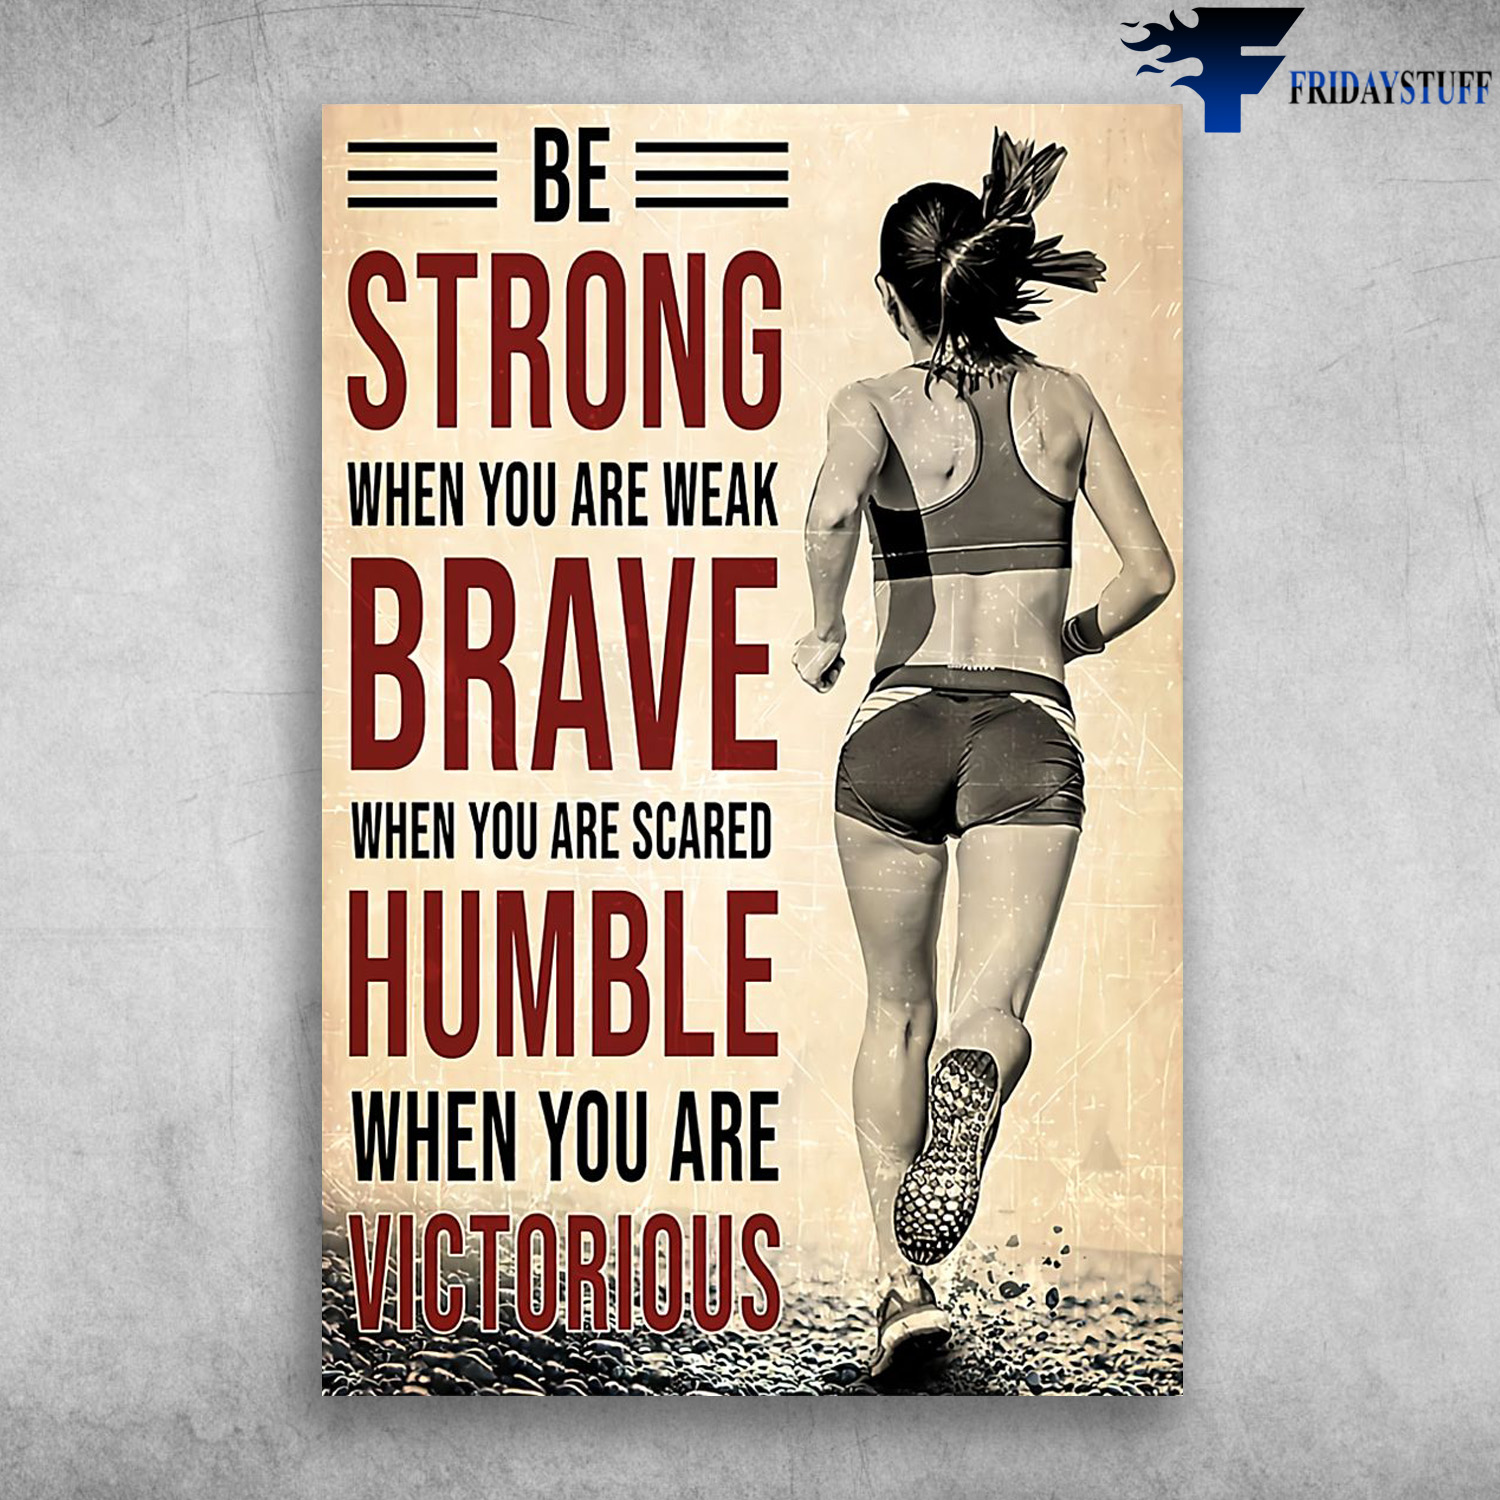 Rinning Girl - Be Strong When You Are Weak, Brave When You Are Scared, Humble When You Are Victorious